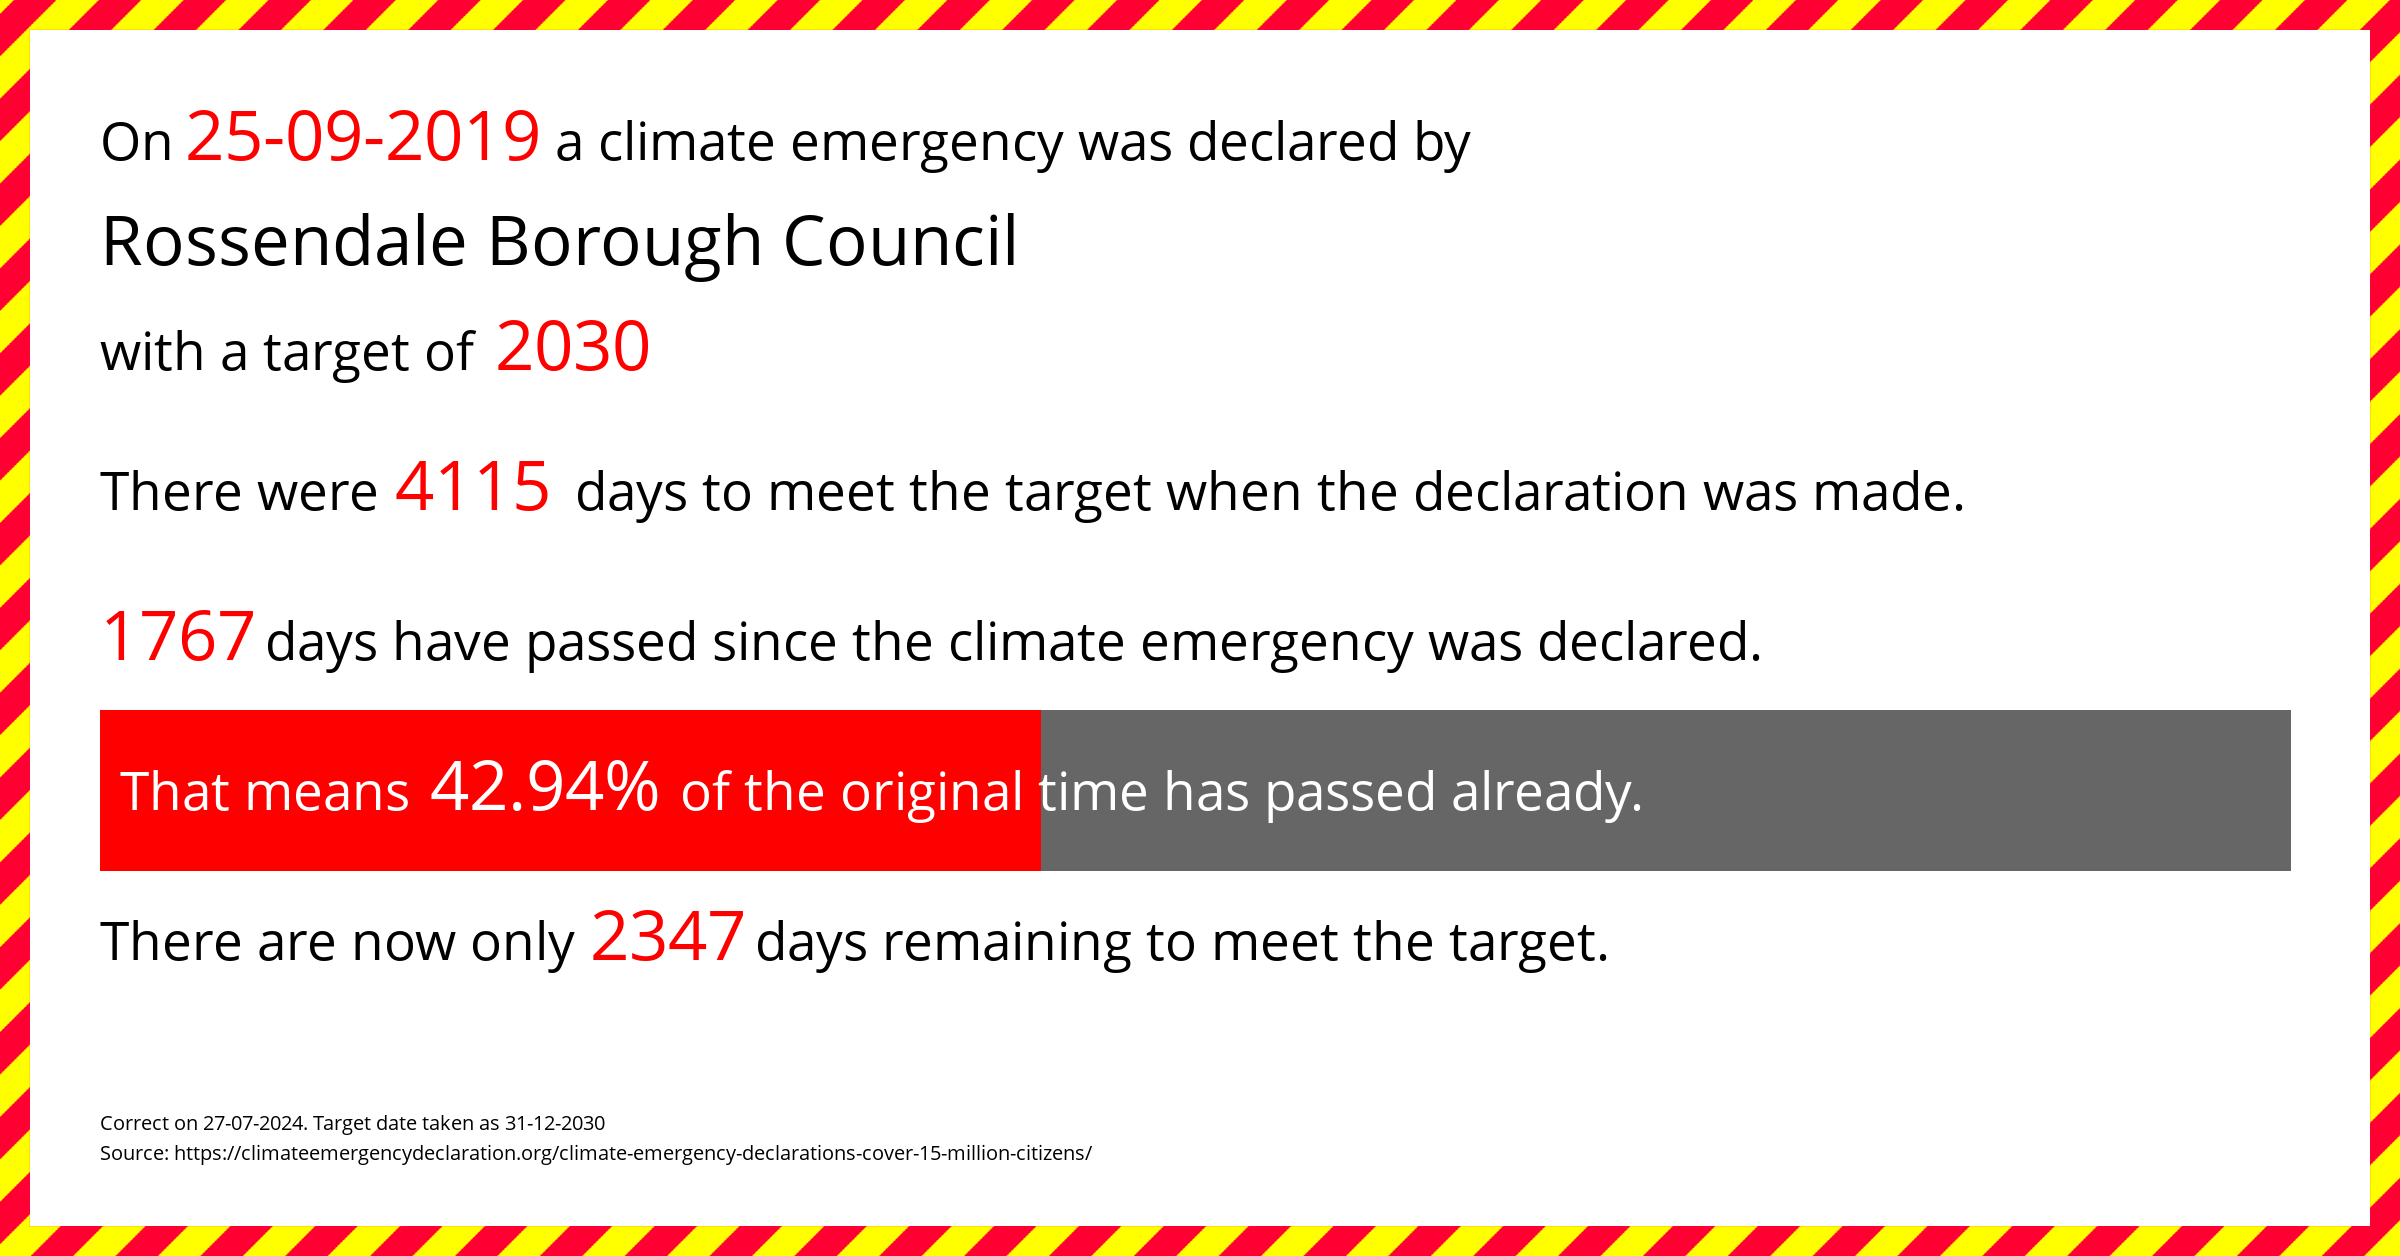 Rossendale Borough Council declared a Climate emergency on Wednesday 25th September 2019, with a target of 2030.